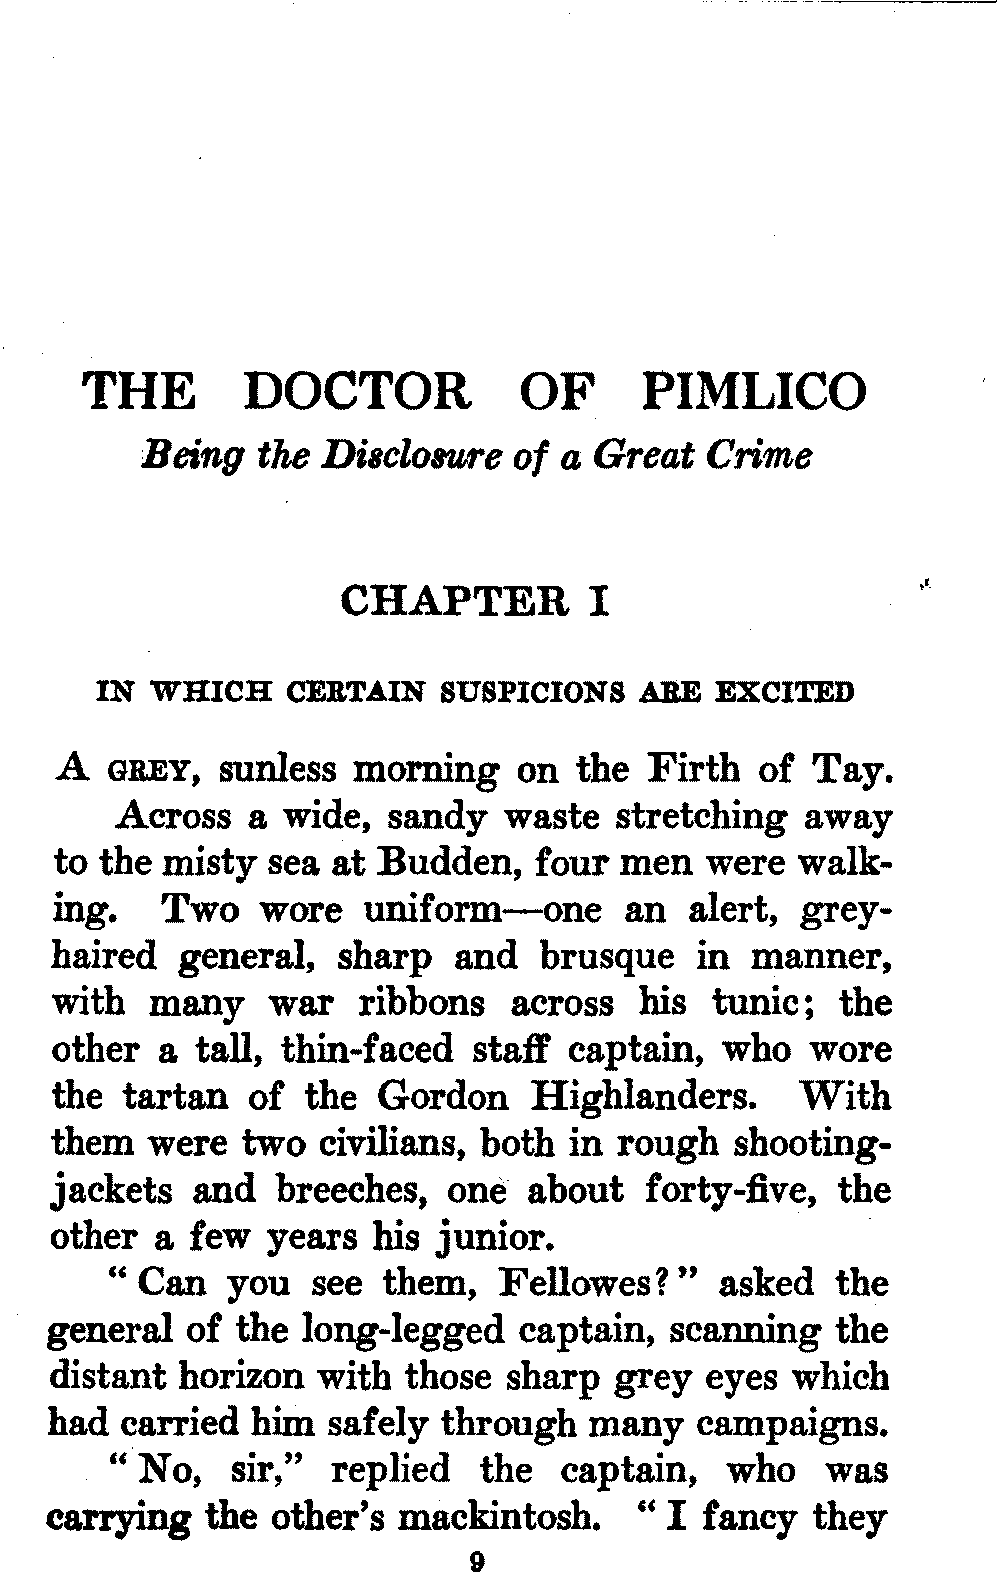 The Project Gutenberg eBook of The Doctor of Pimlico, by William Le Queux.